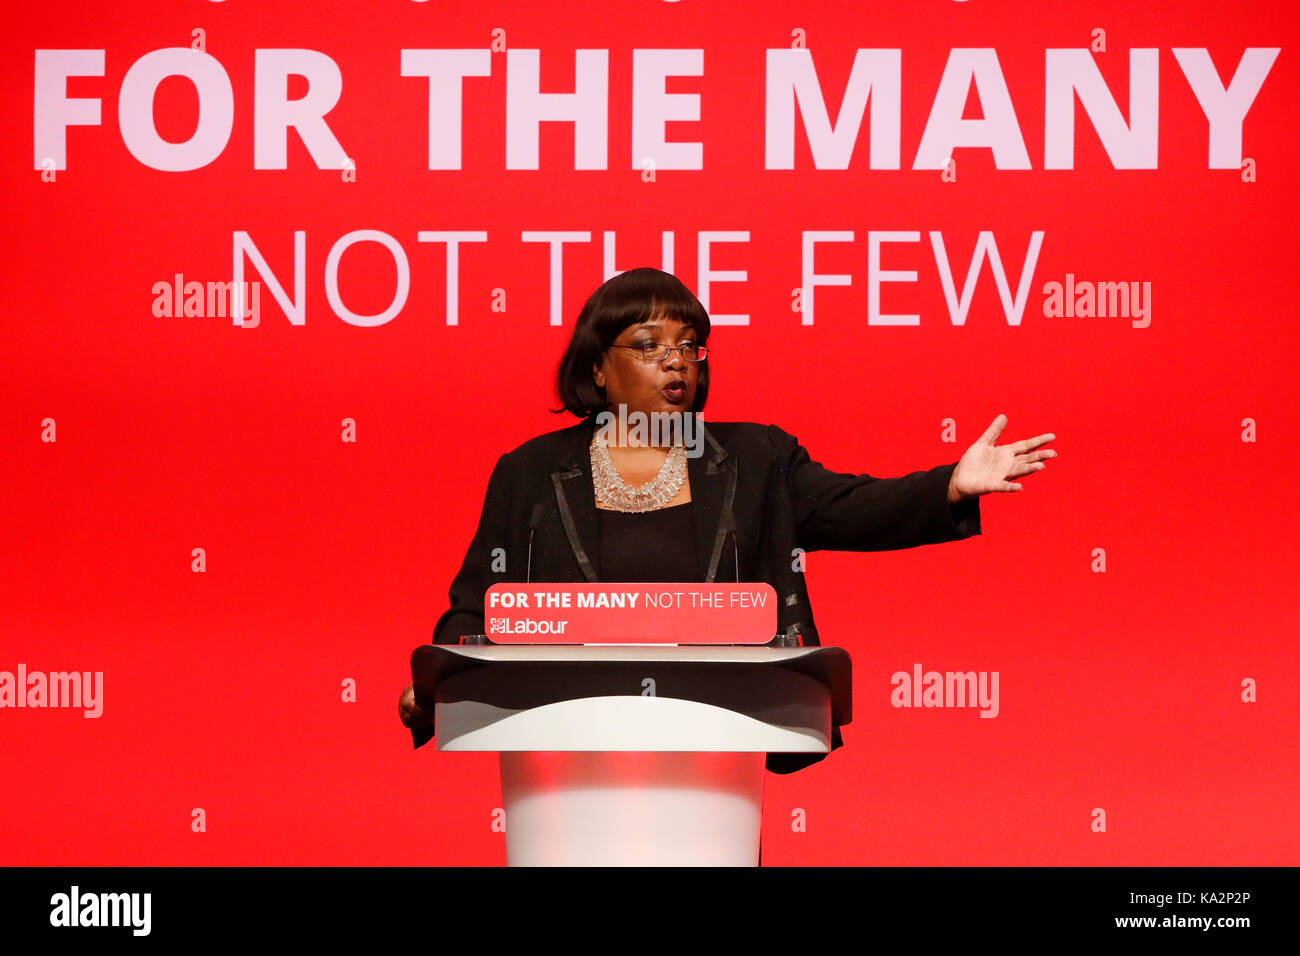 Brighton, UK. 24th September, 2017. Diane Abbott, Shadow Home Secretary, makes a speech during the annual Labour Party Conference in Brighton, UK Sunday, September 24, 2017. Photograph : Credit: Luke MacGregor/Alamy Live News Stock Photo